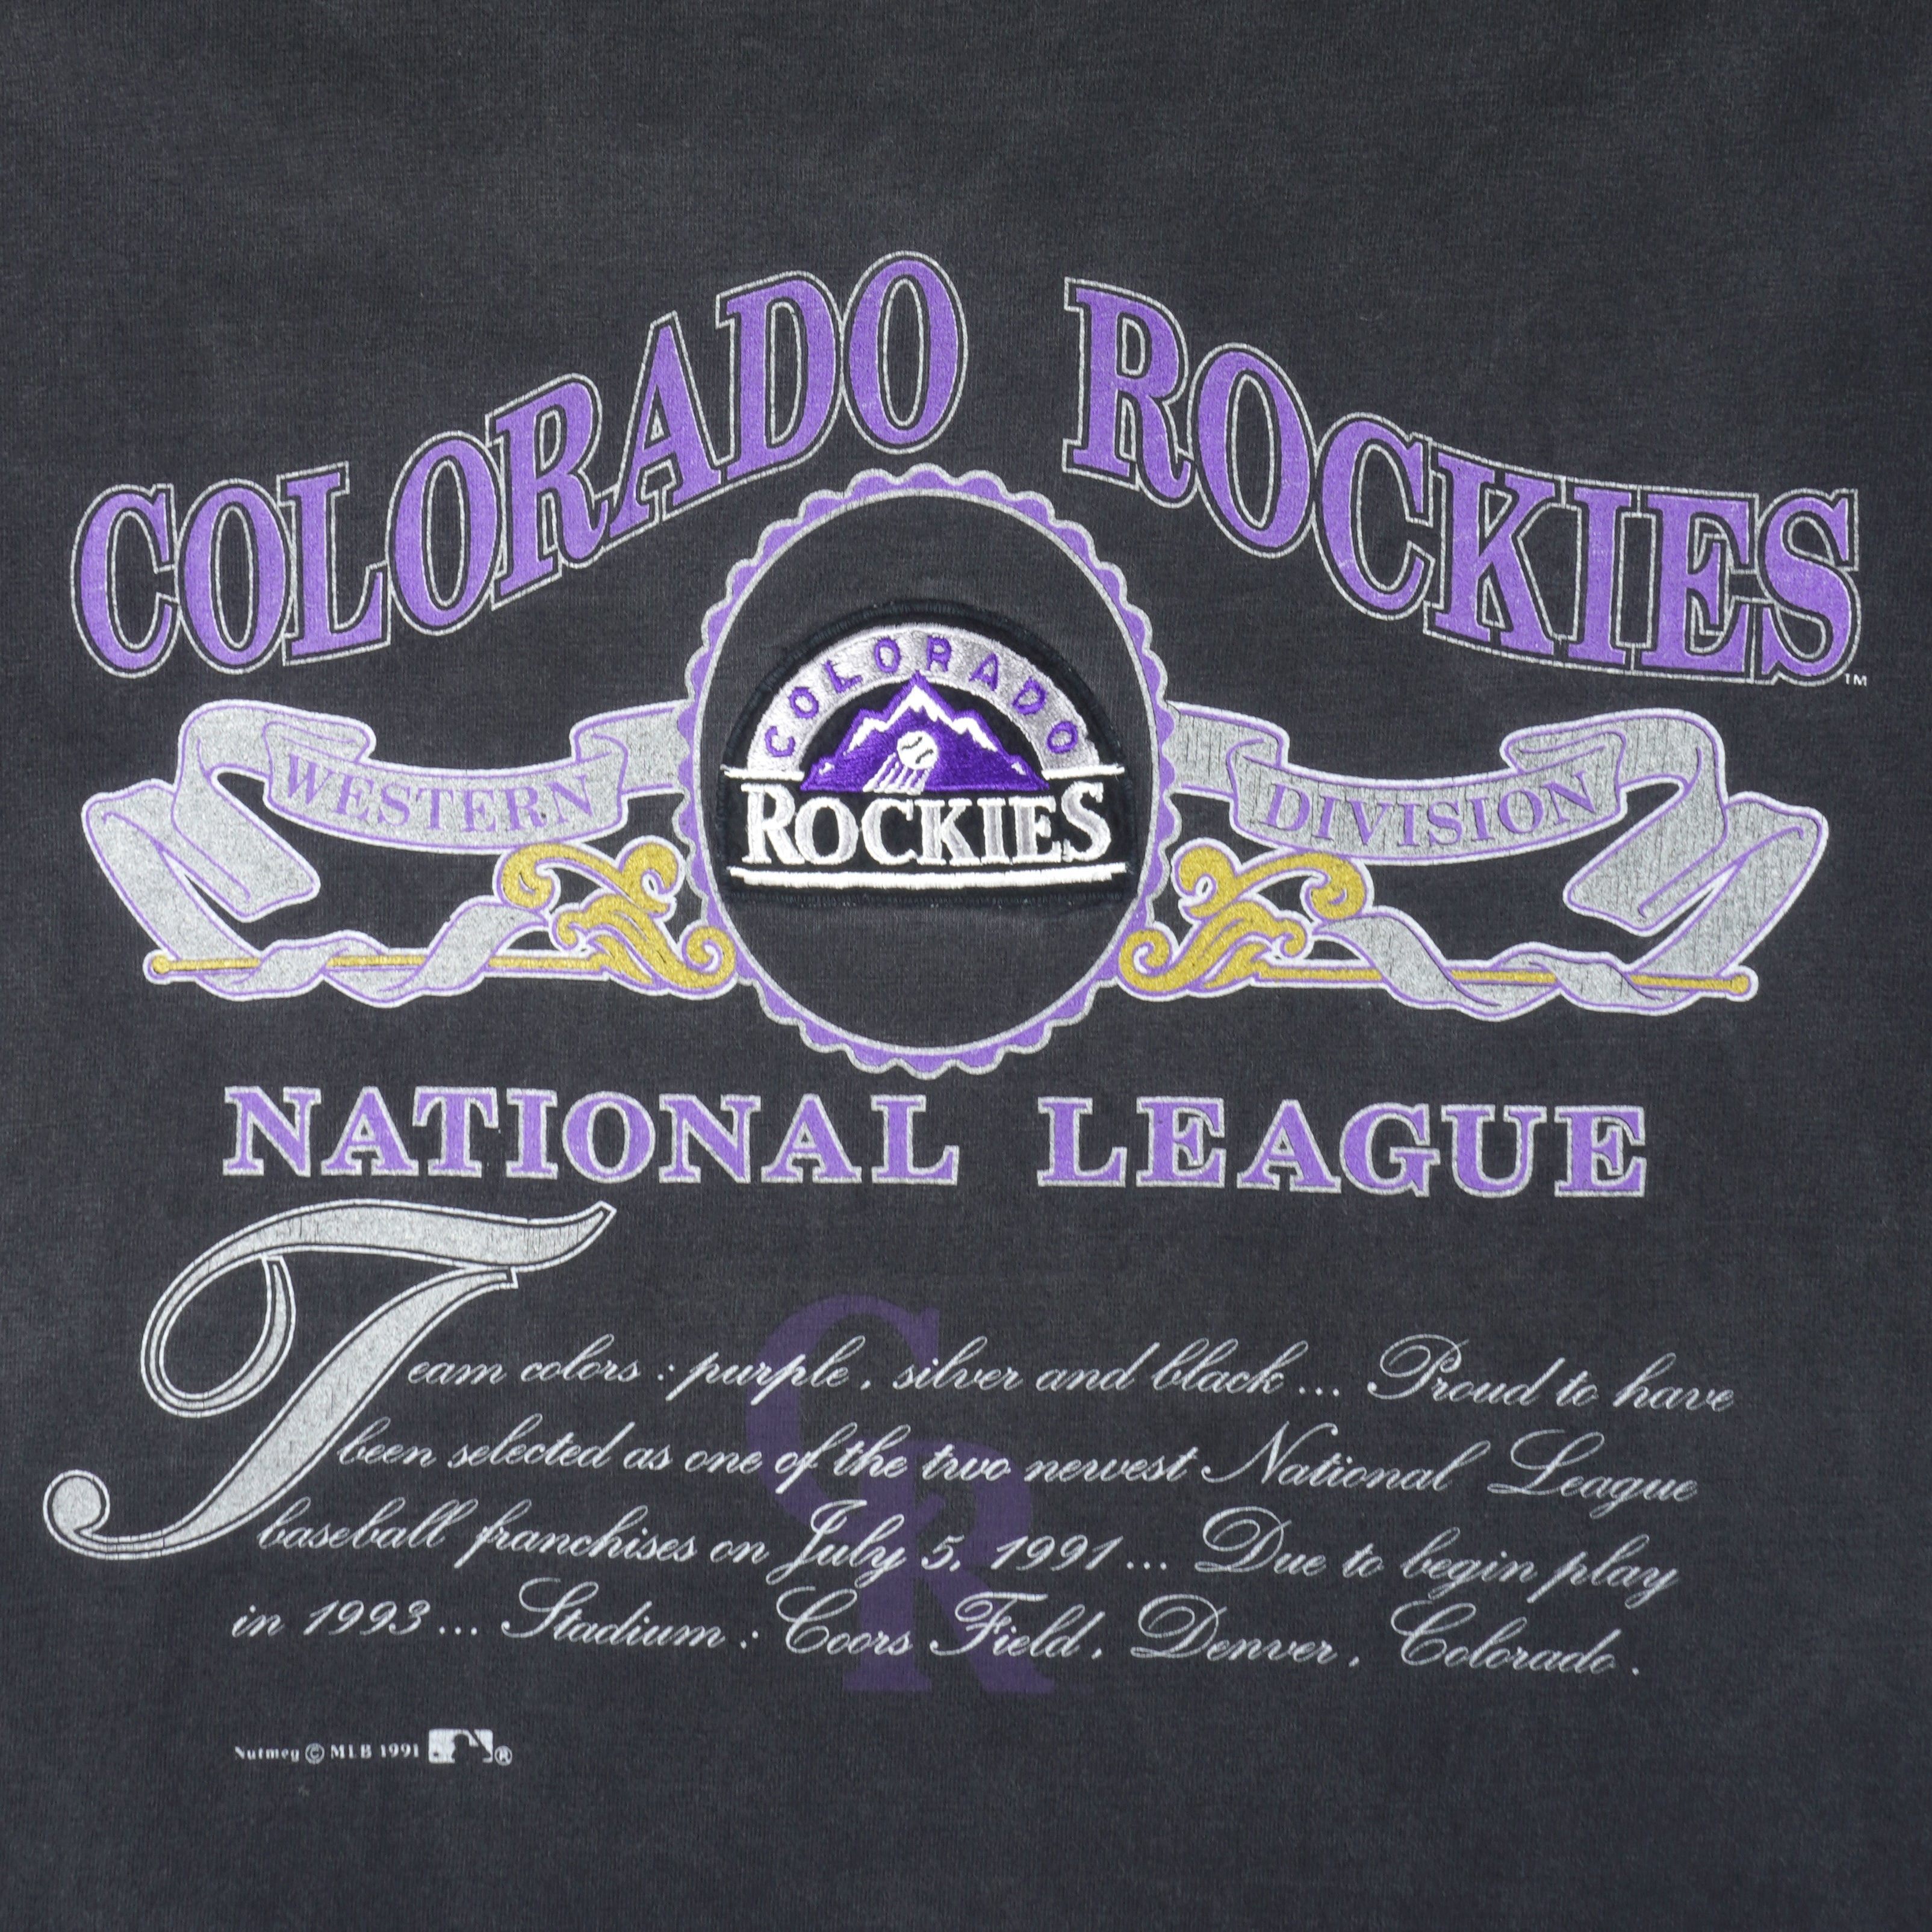 Vintage Colorado Rockies T Shirt Tee Trench Made USA Size XXL -  Sweden